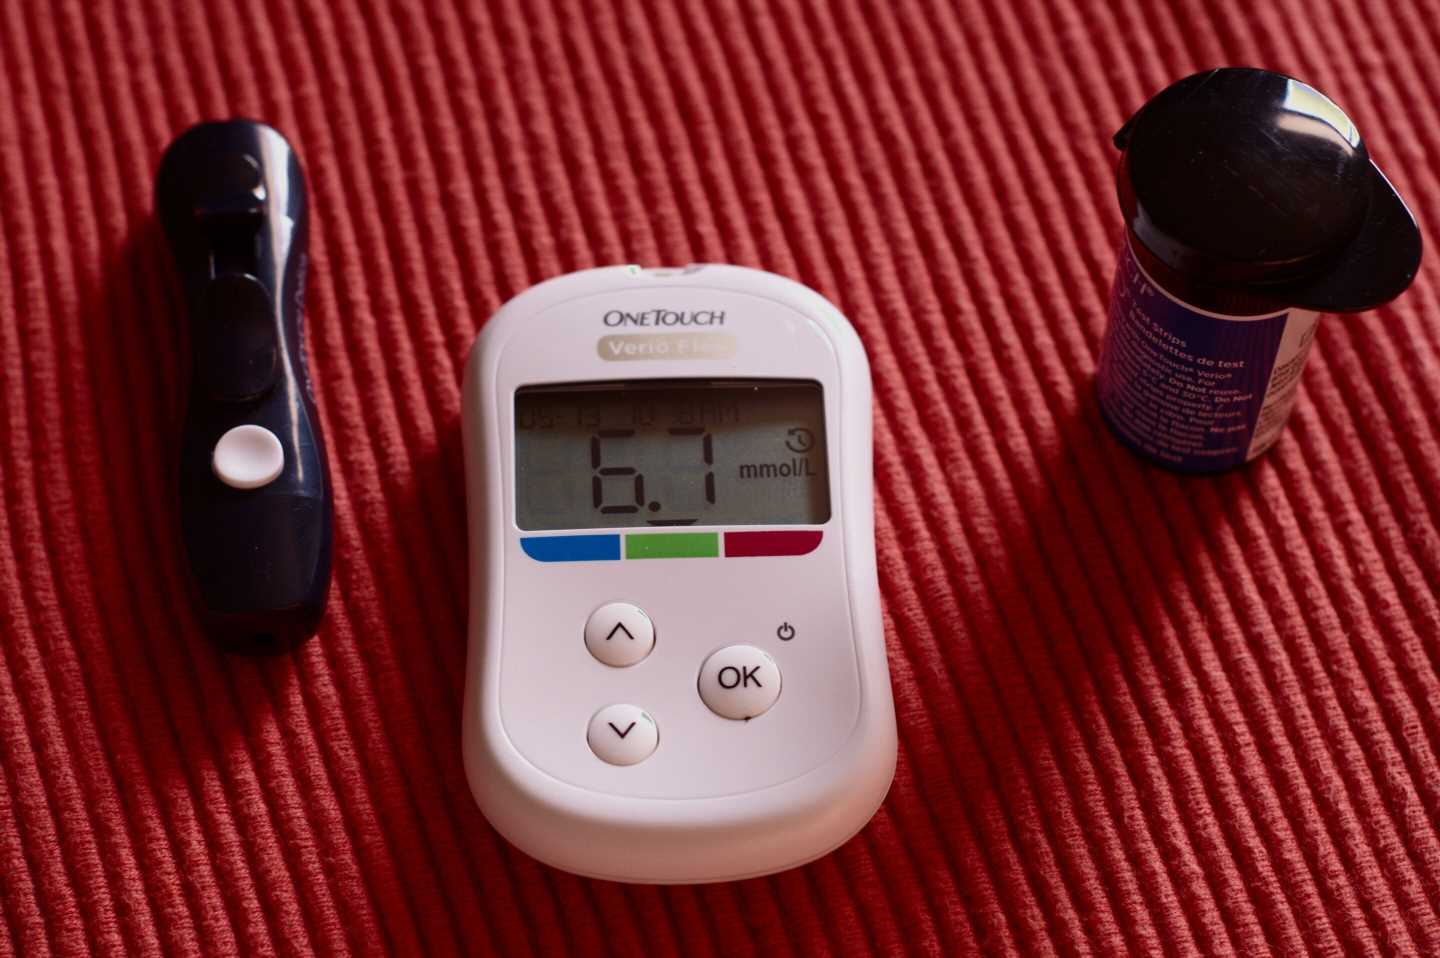 Spanish-speaking children with type 1 diabetes face barriers to using medical technology